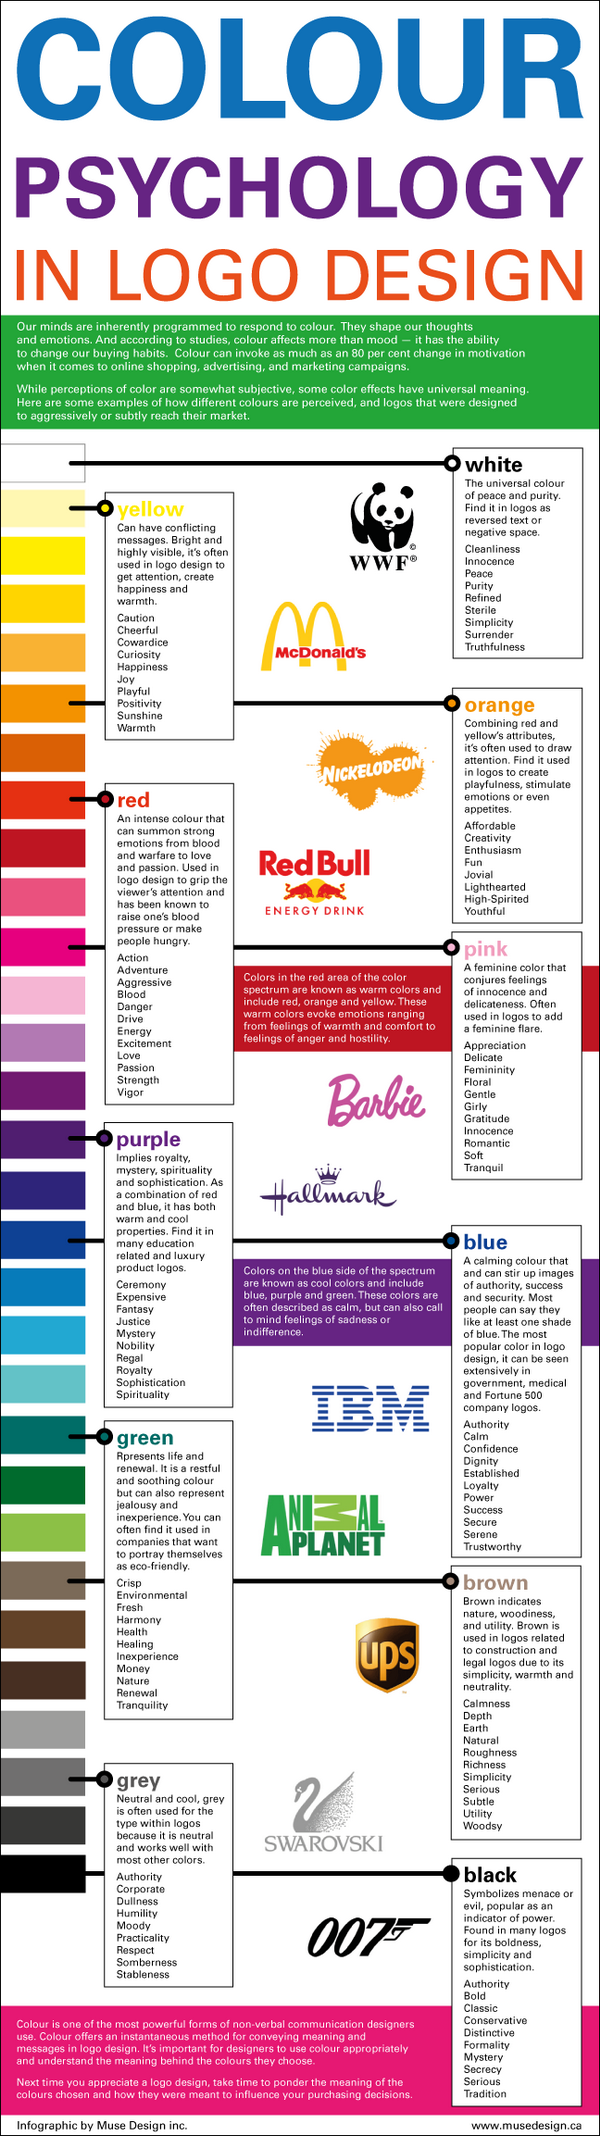 Color psychology in logo design – pinned by @oriol_flo